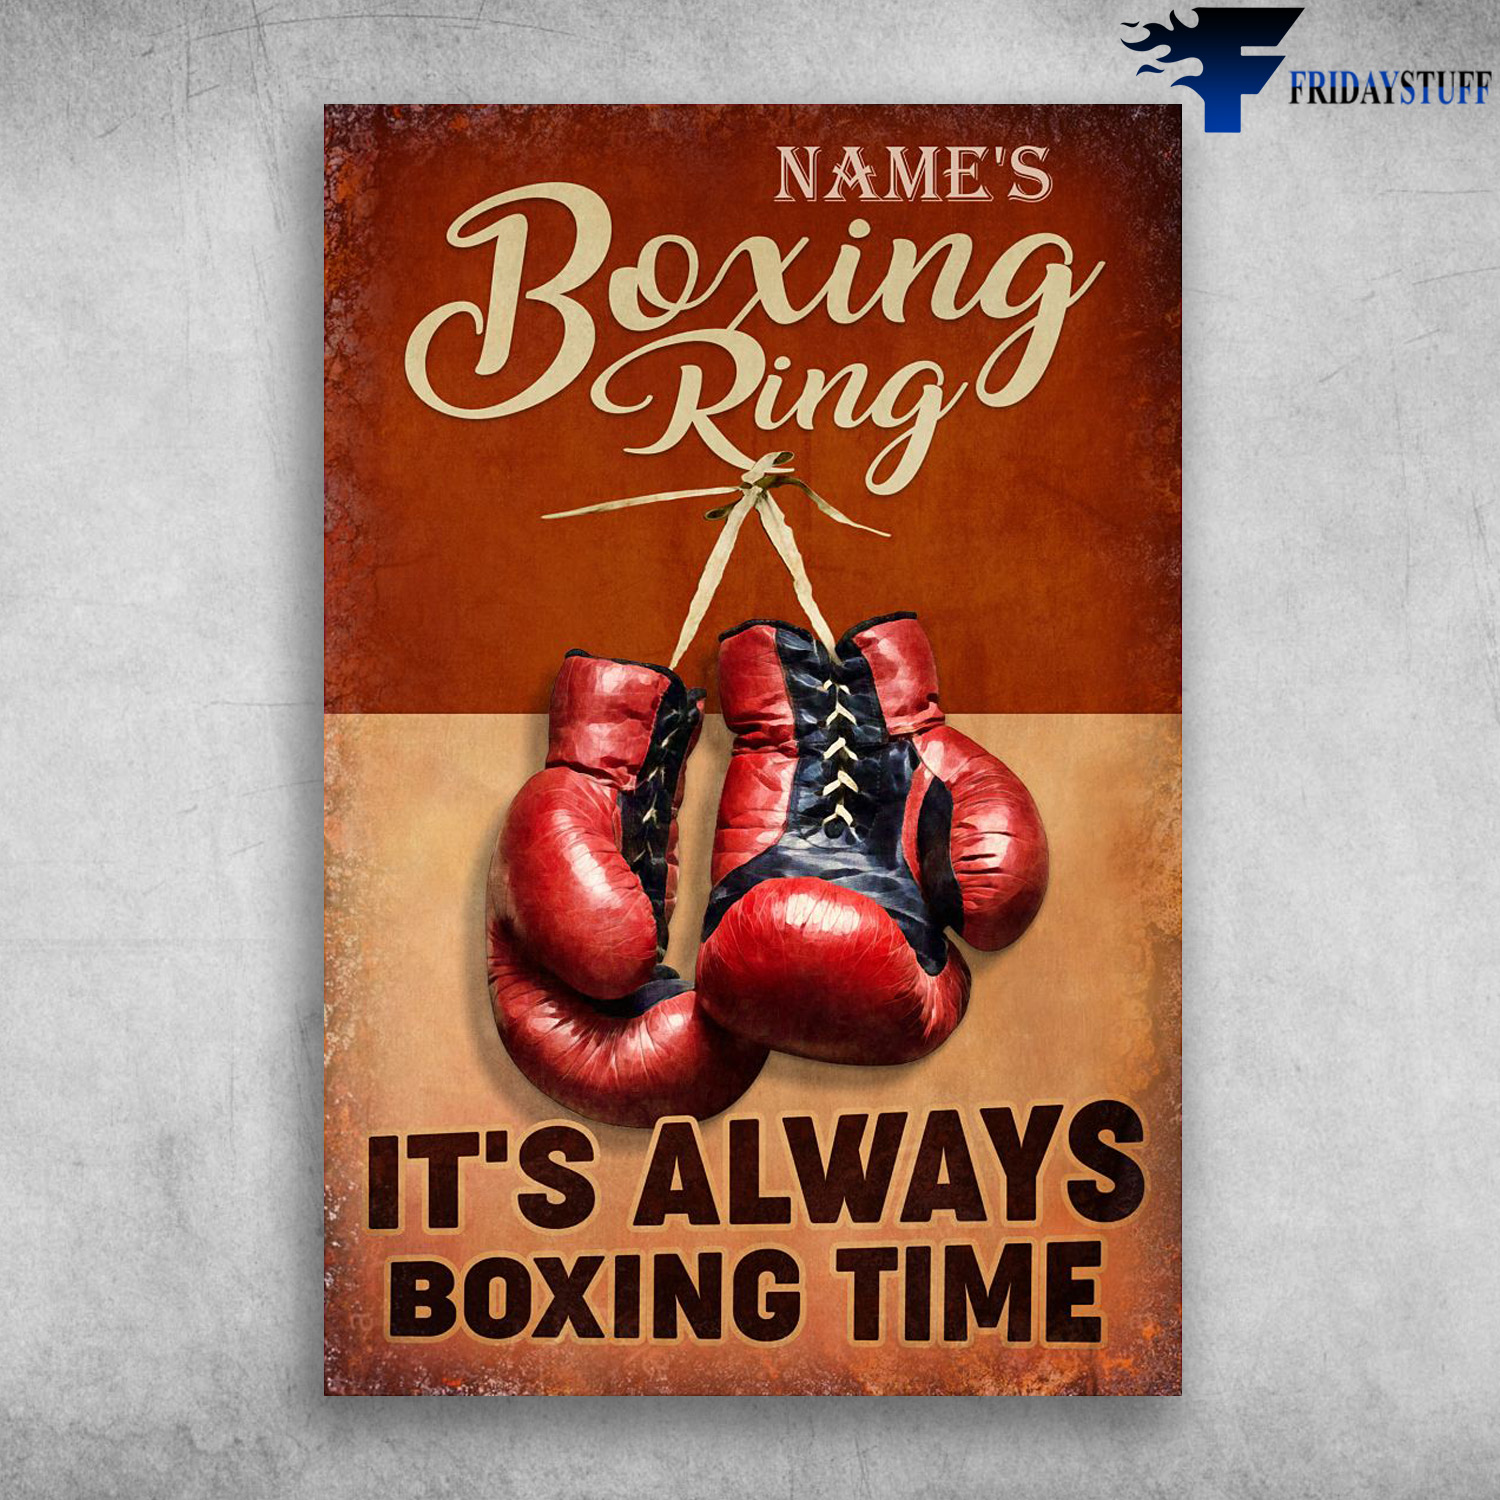 Boxing Gloves - Name's Boxing Ring, It's Always Boxing Time